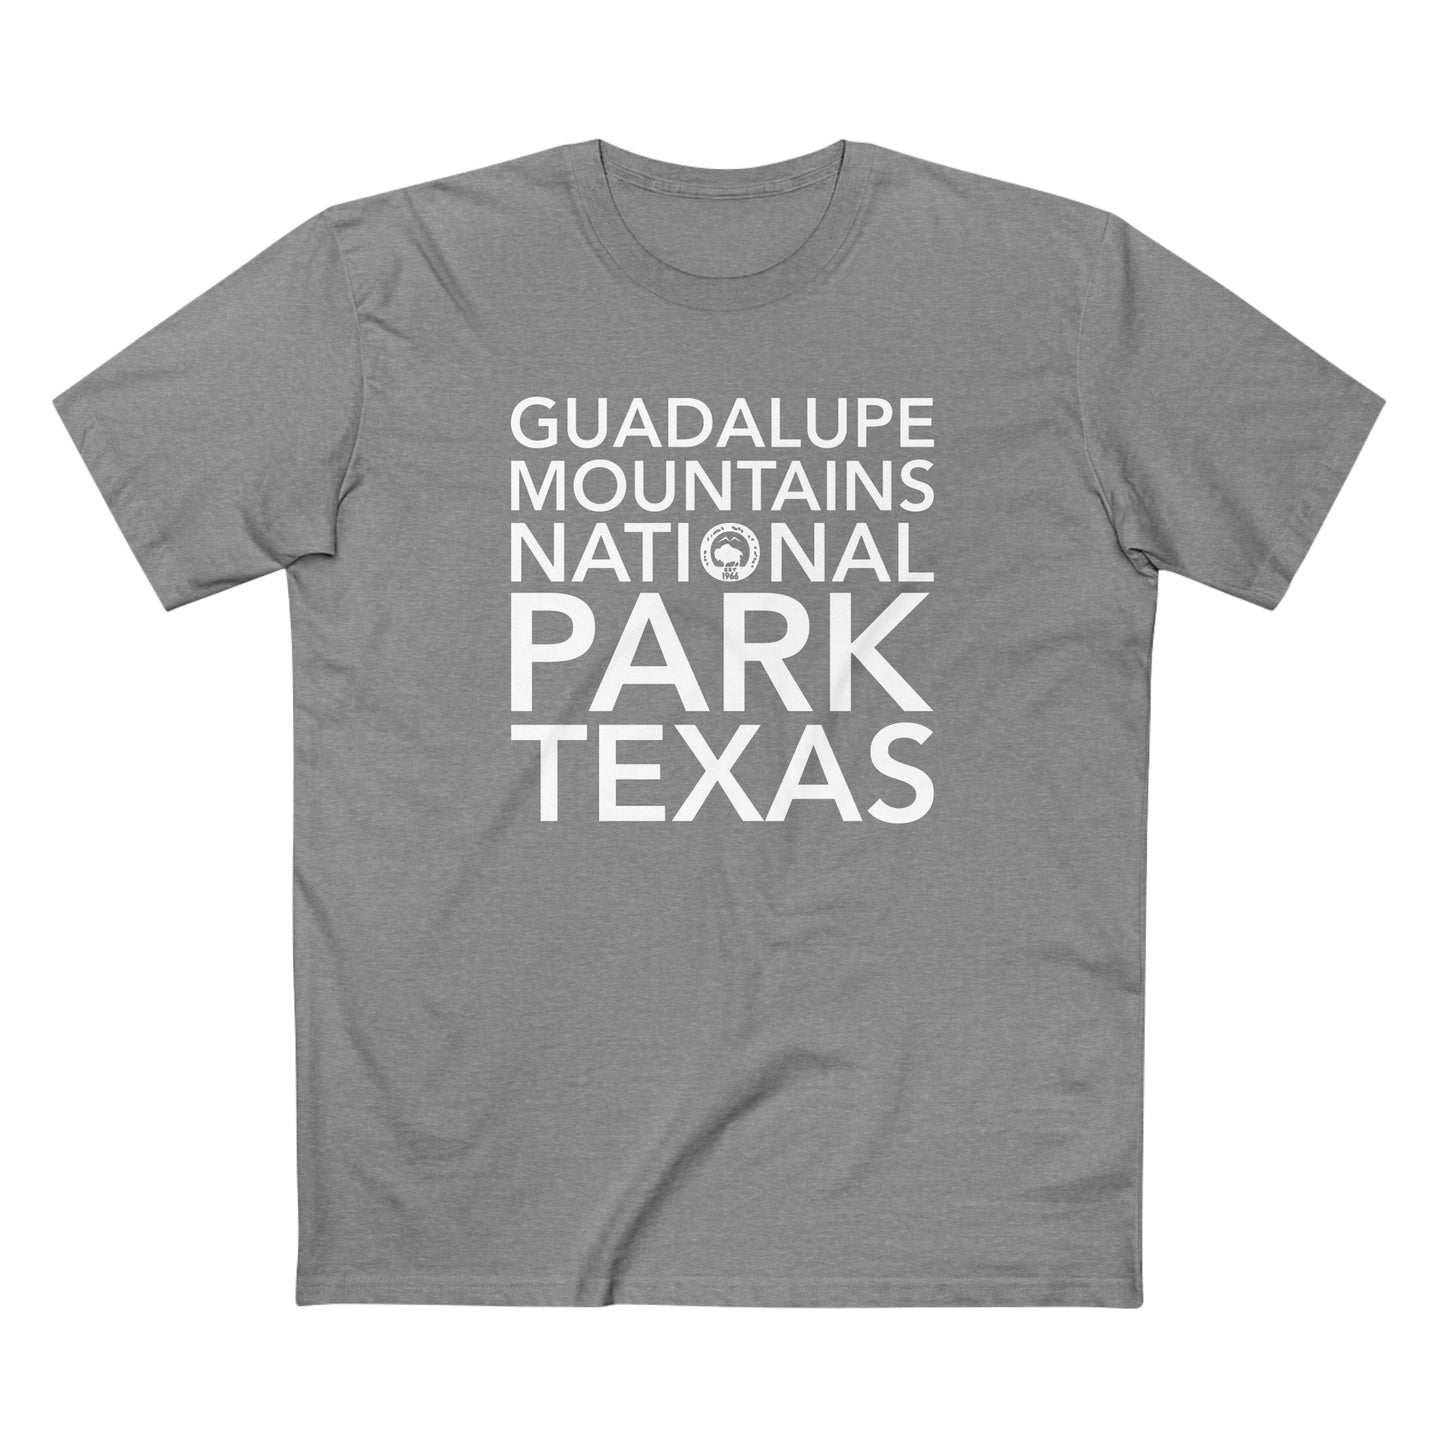 Guadalupe Mountains National Park T-Shirt Block Text